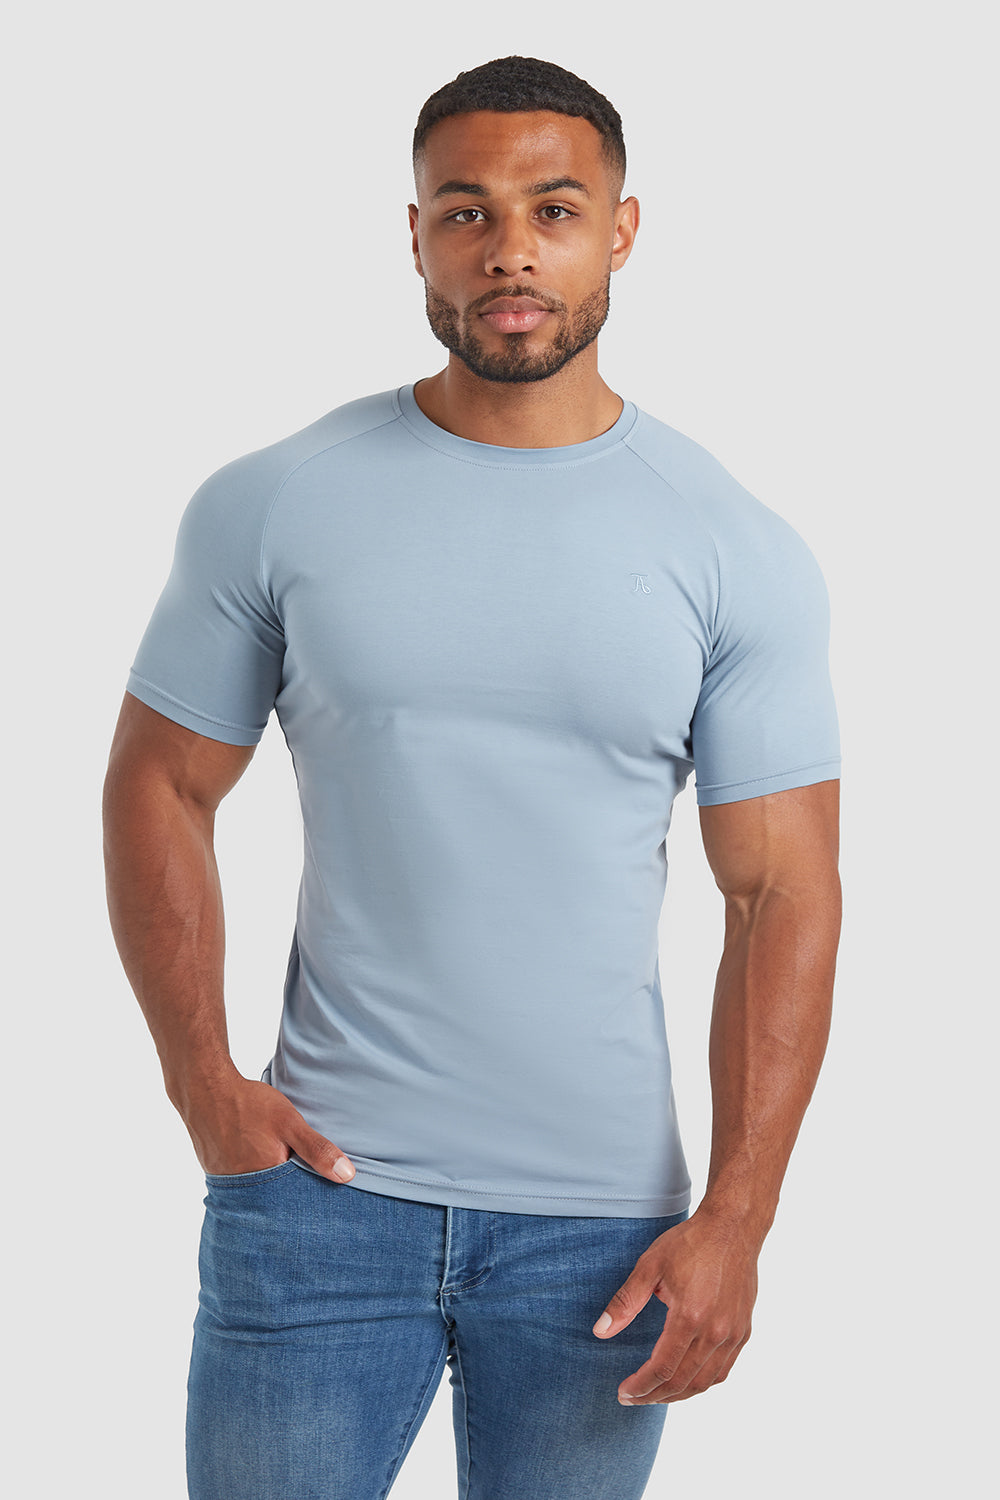 Muscle Fit T-Shirt in Storm - TAILORED ATHLETE - ROW